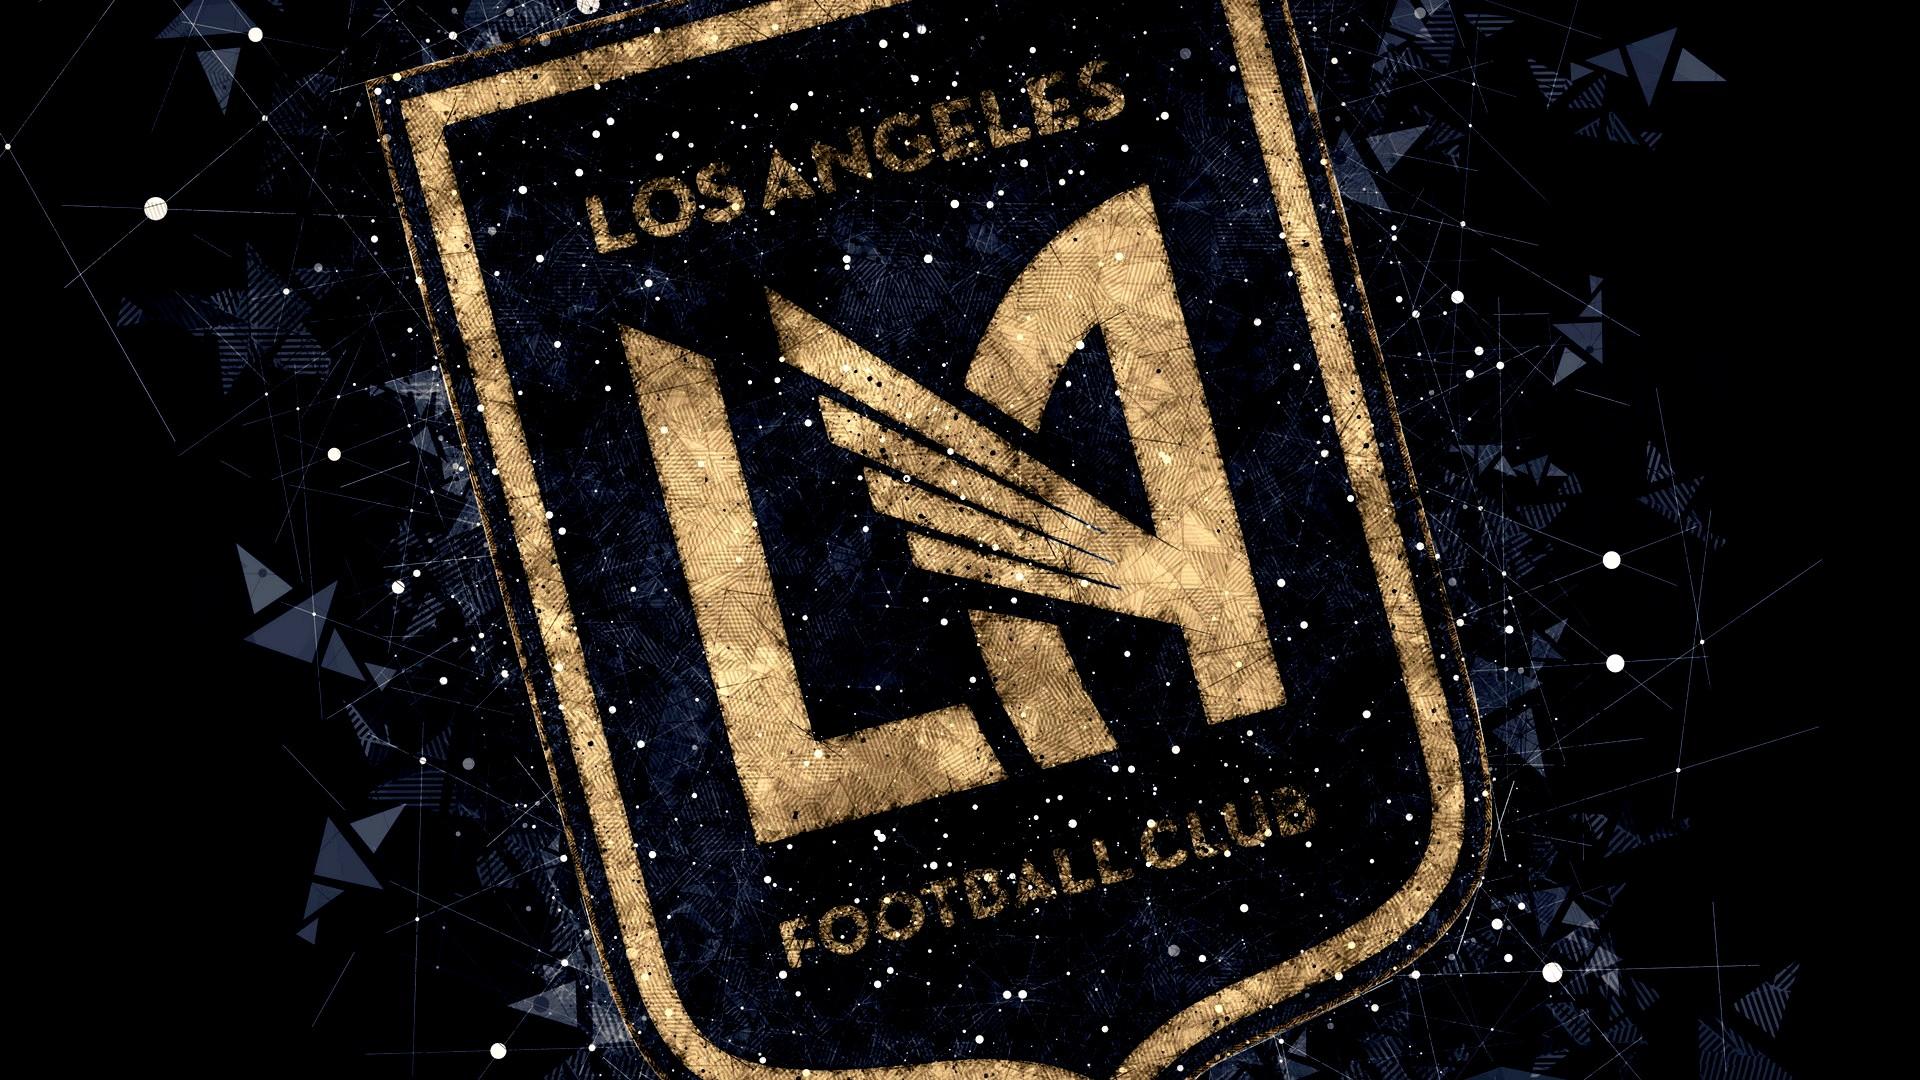 Los Angeles FC Wallpapers  Top Free Los Angeles FC Backgrounds   WallpaperAccess